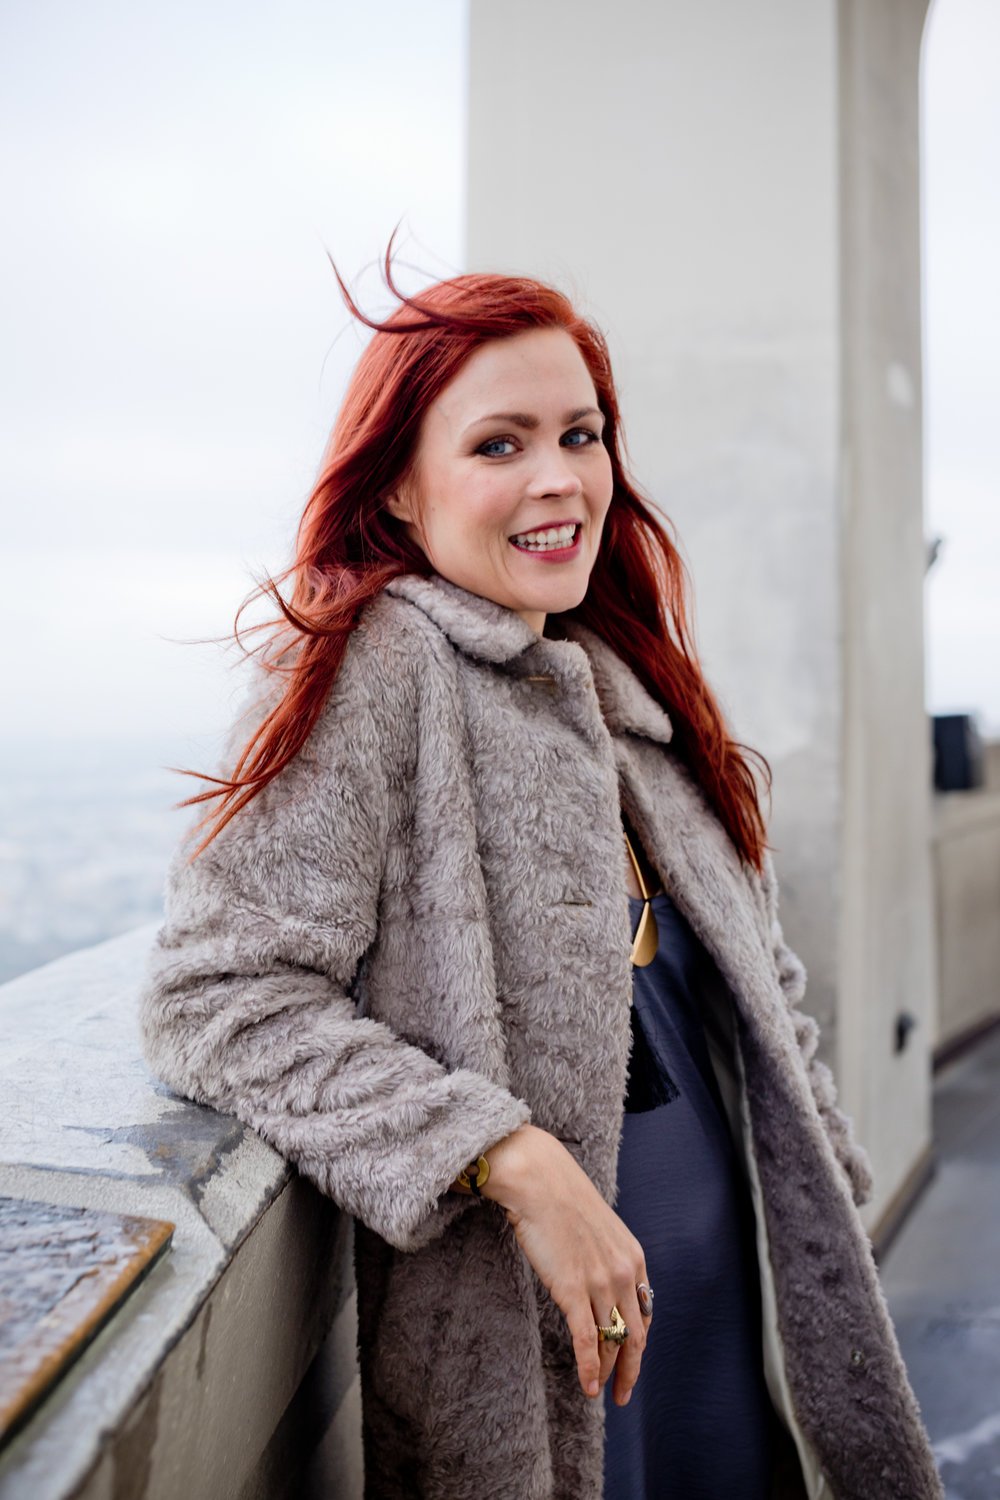 Headshot of woman with red hair, smiling, at the Griffith Observatory in LA